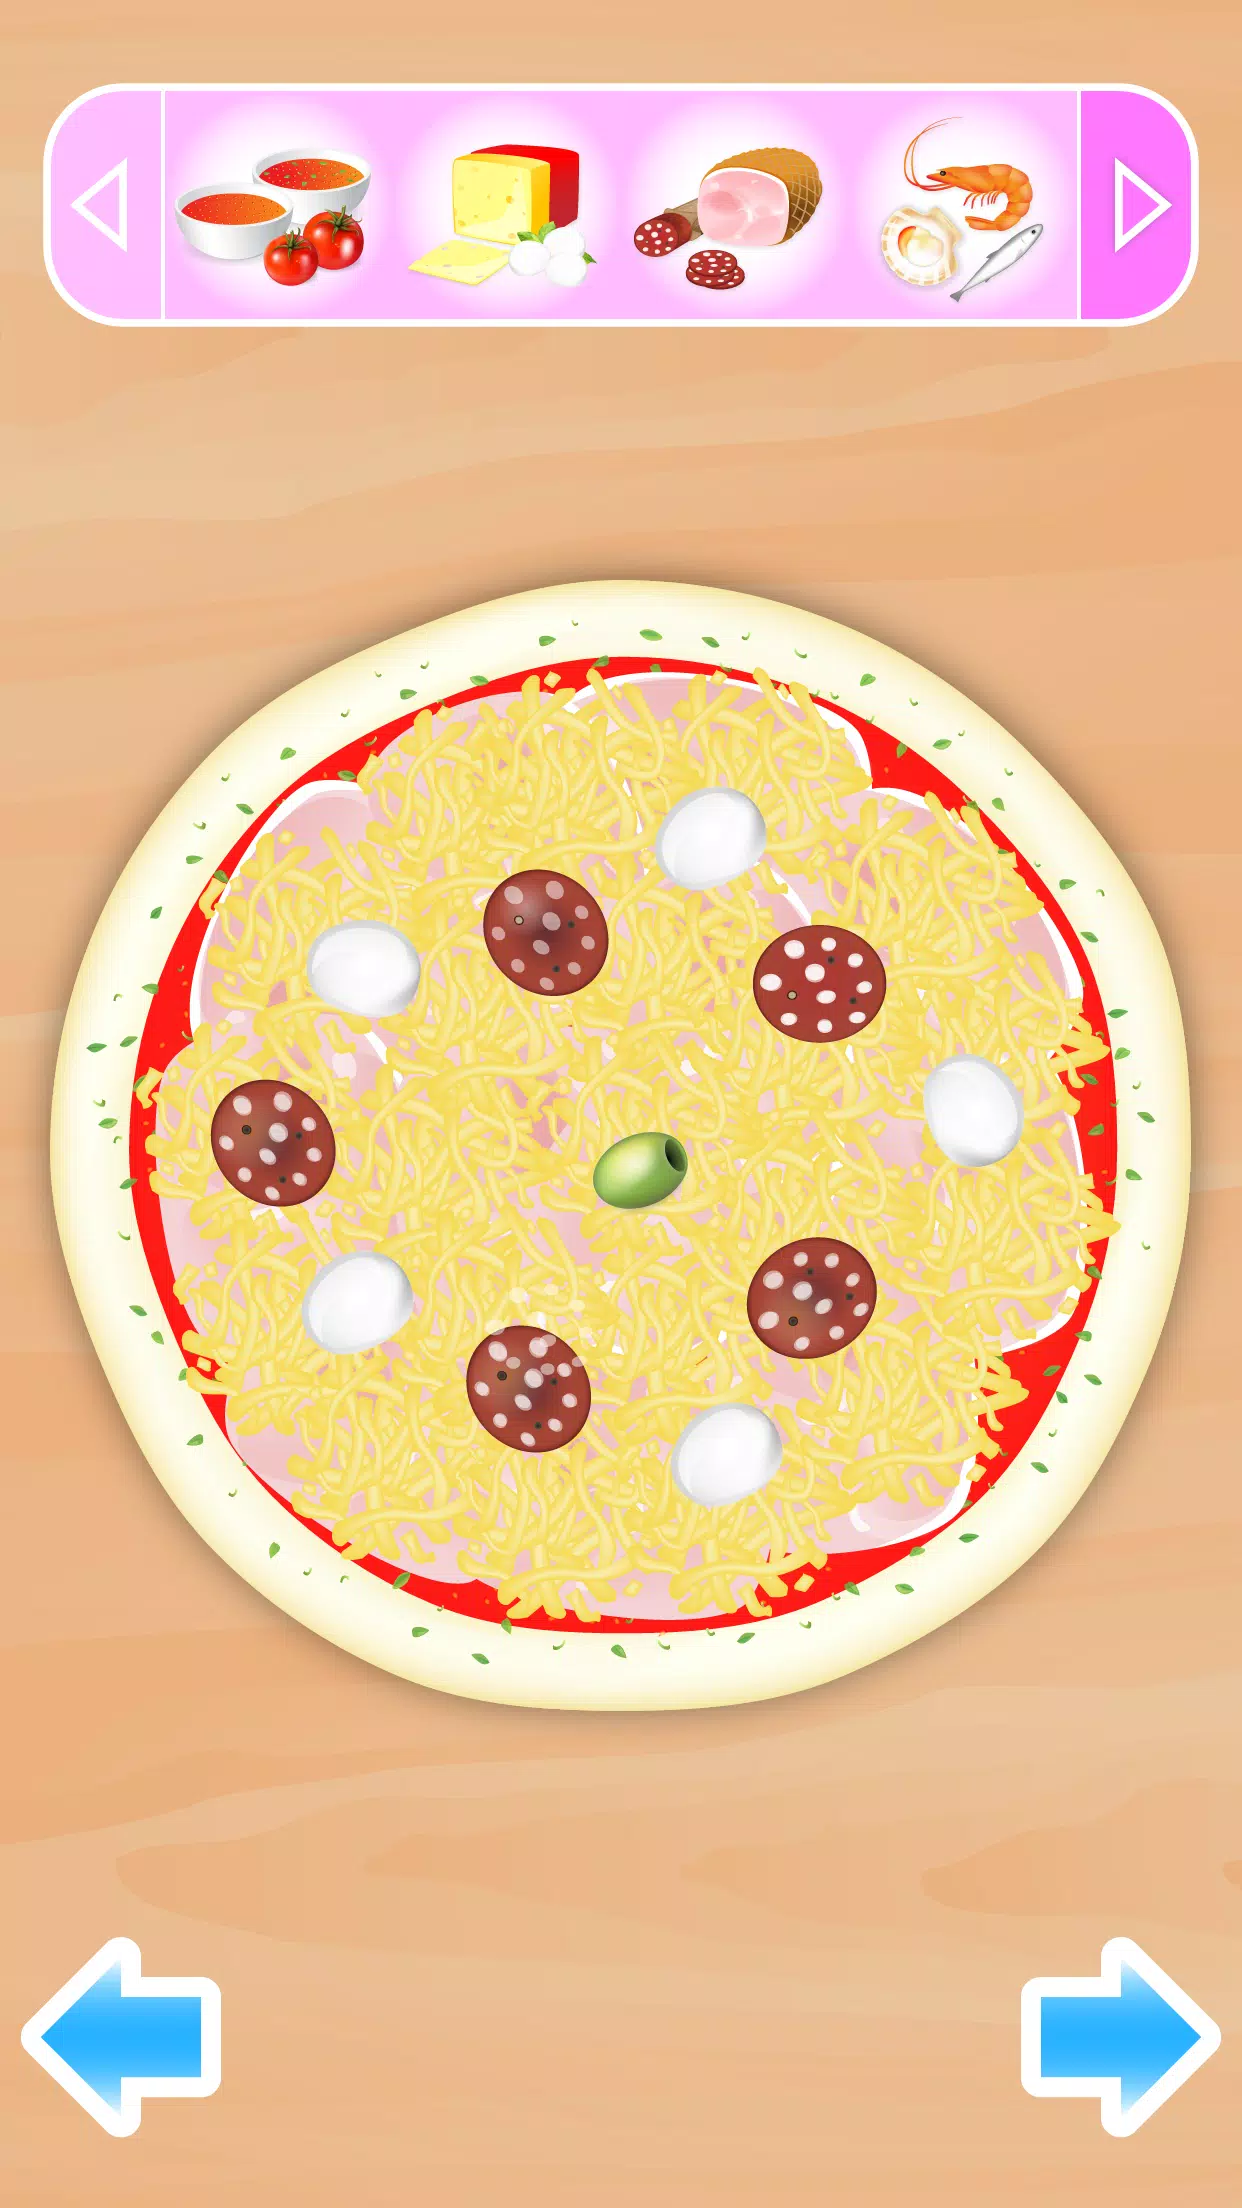 Pizza Coupons - I'm In! APK for Android Download